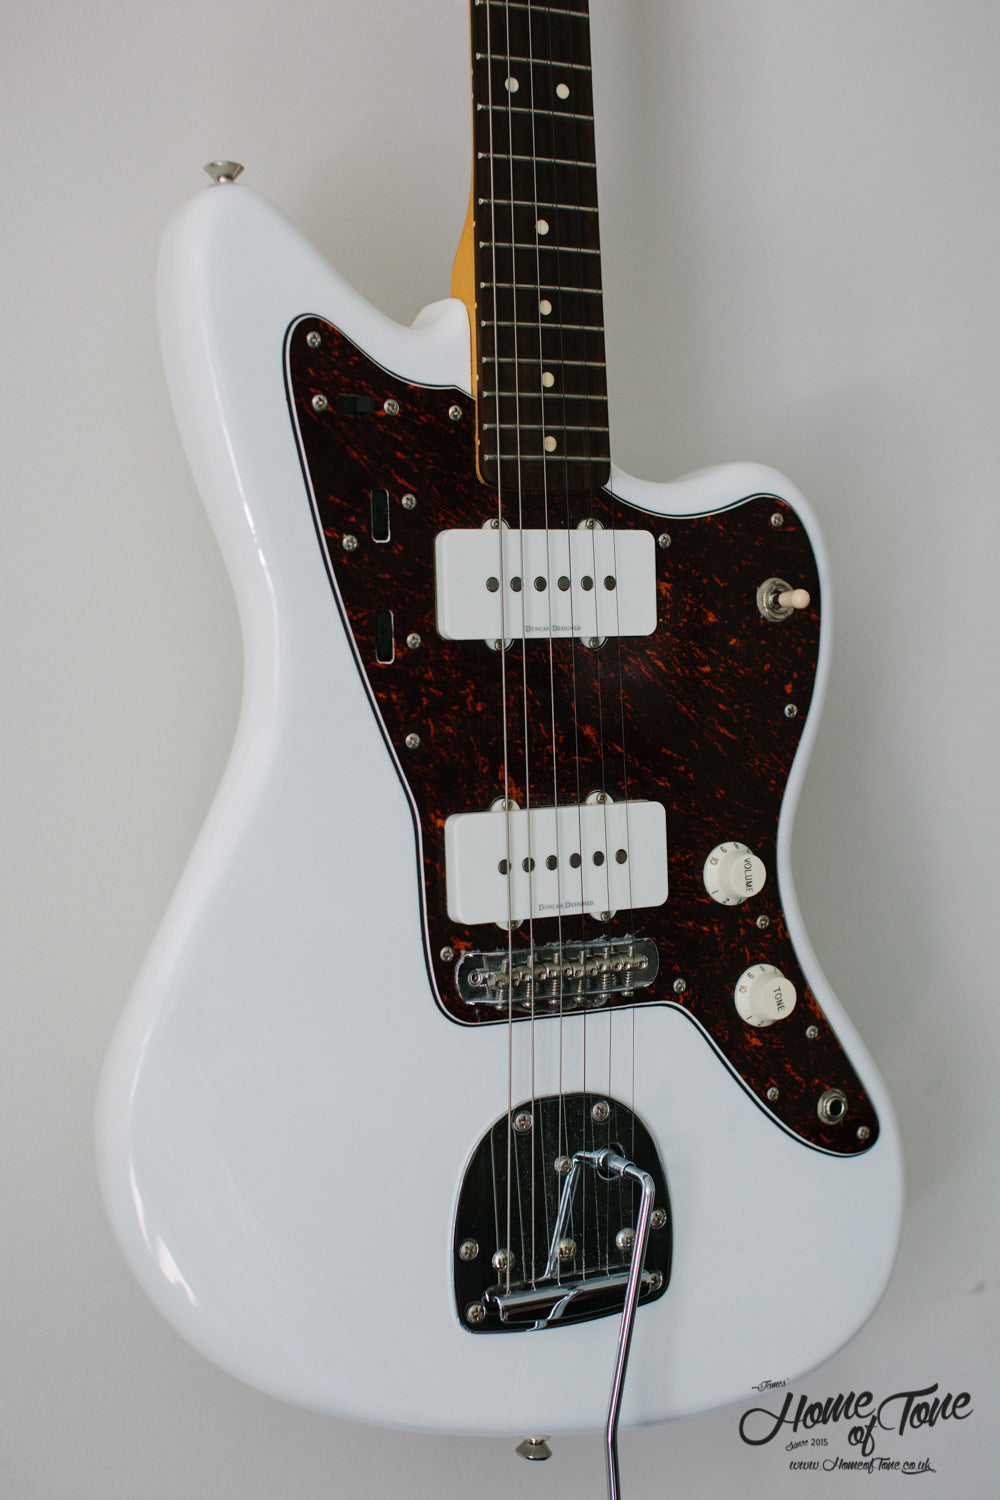 Project Offset Phase One - A Squier Vintage Modified Jazzmaster 